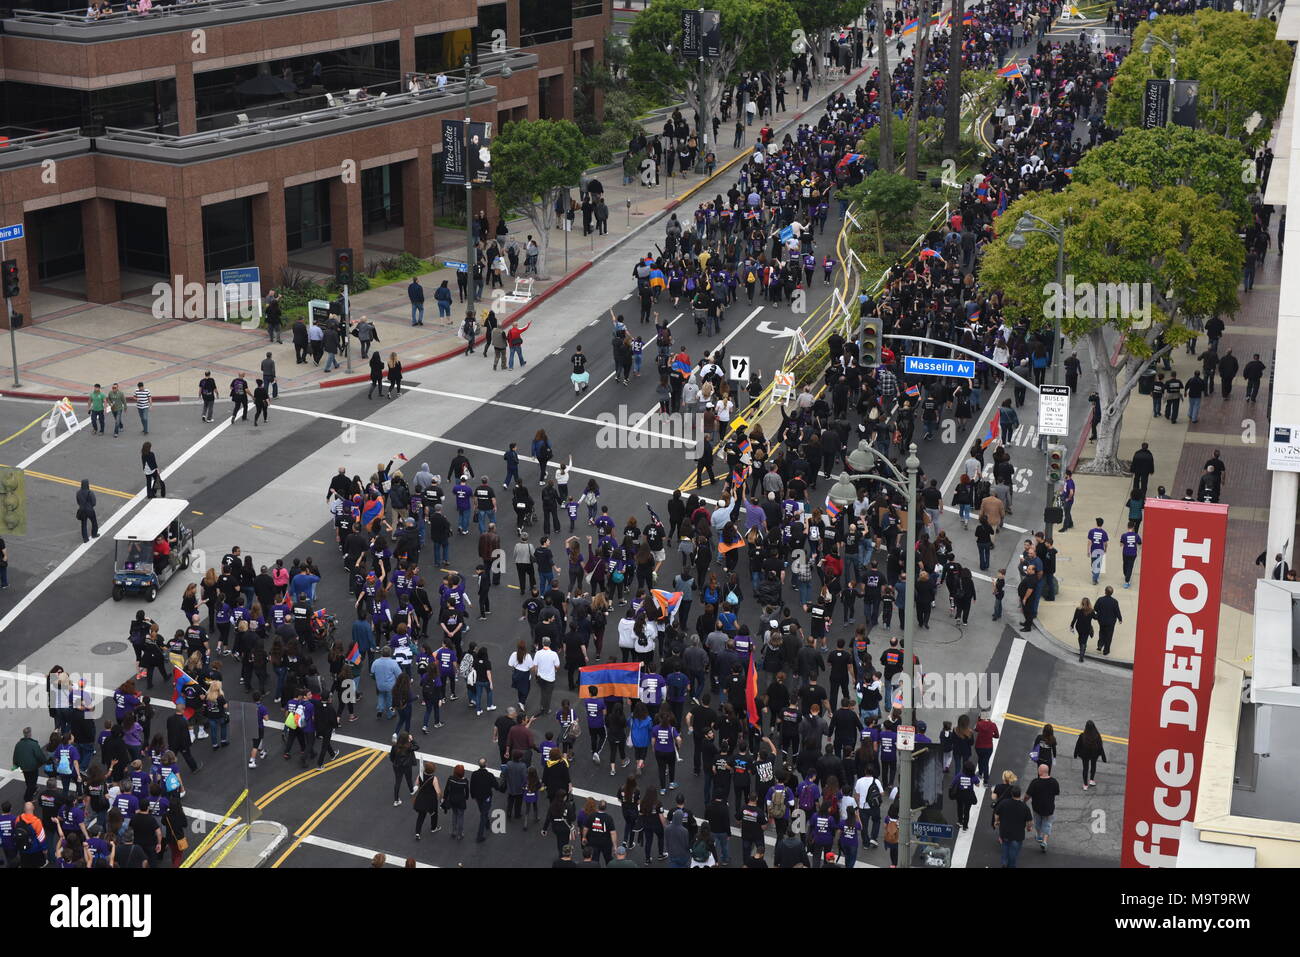 LOS ANGELES - APRIL 24: Armenian Community March. Thousands of people marched in Los Angeles to mark the anniversary of the 1915 Armenian genocide. Stock Photo